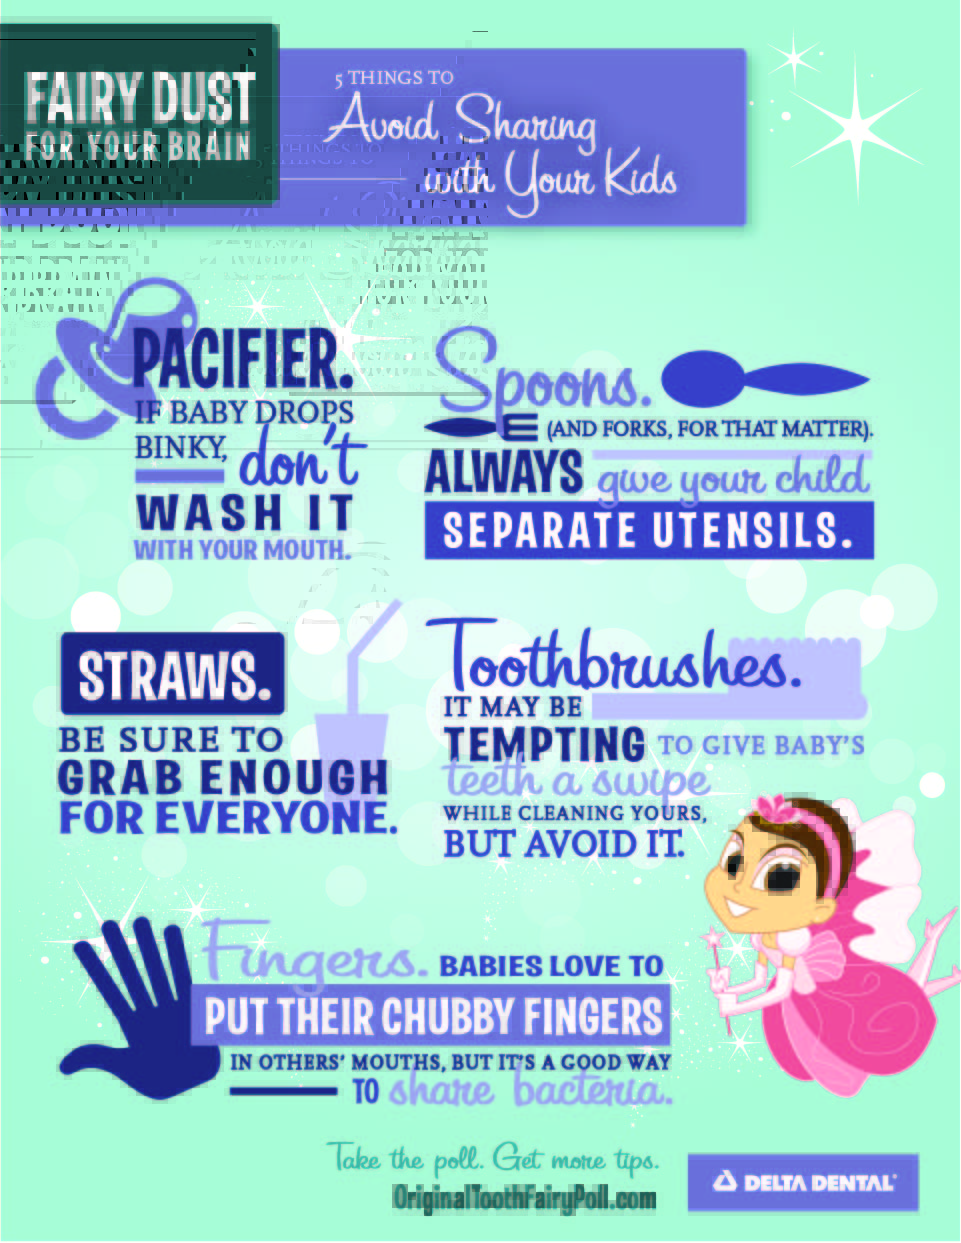 5 things to avoid sharing with your kids